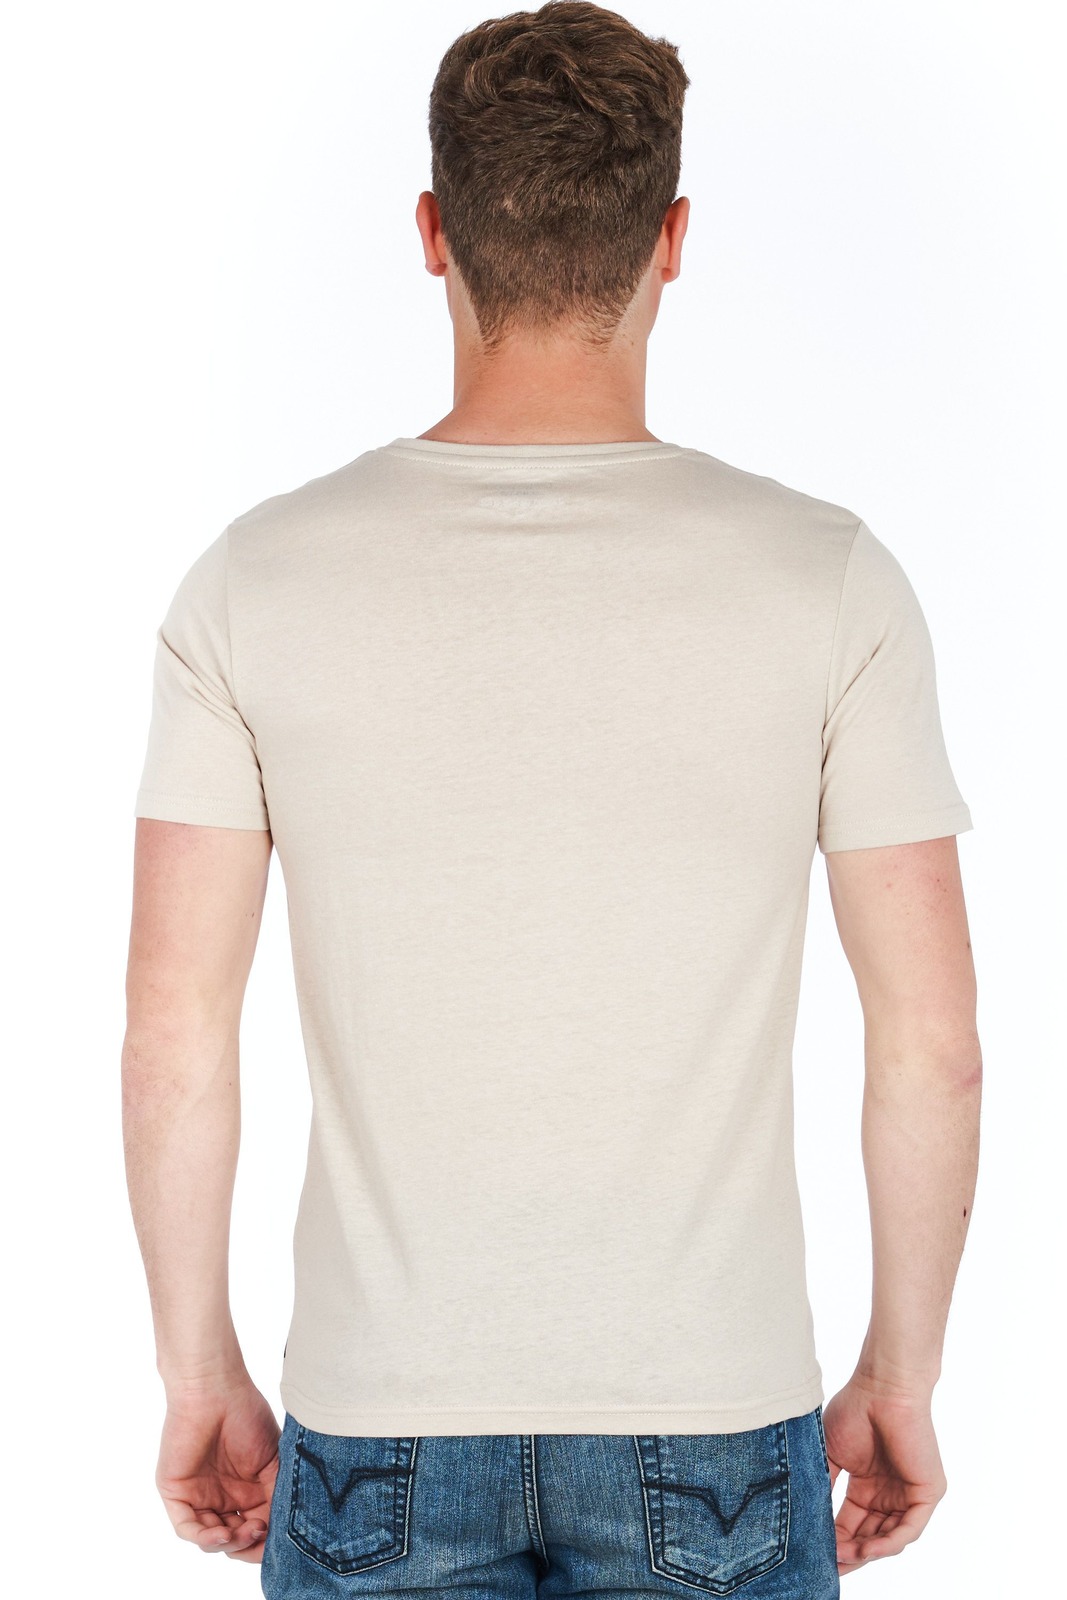 Jeckerson Grey T-shirts for Men - ORDINARY